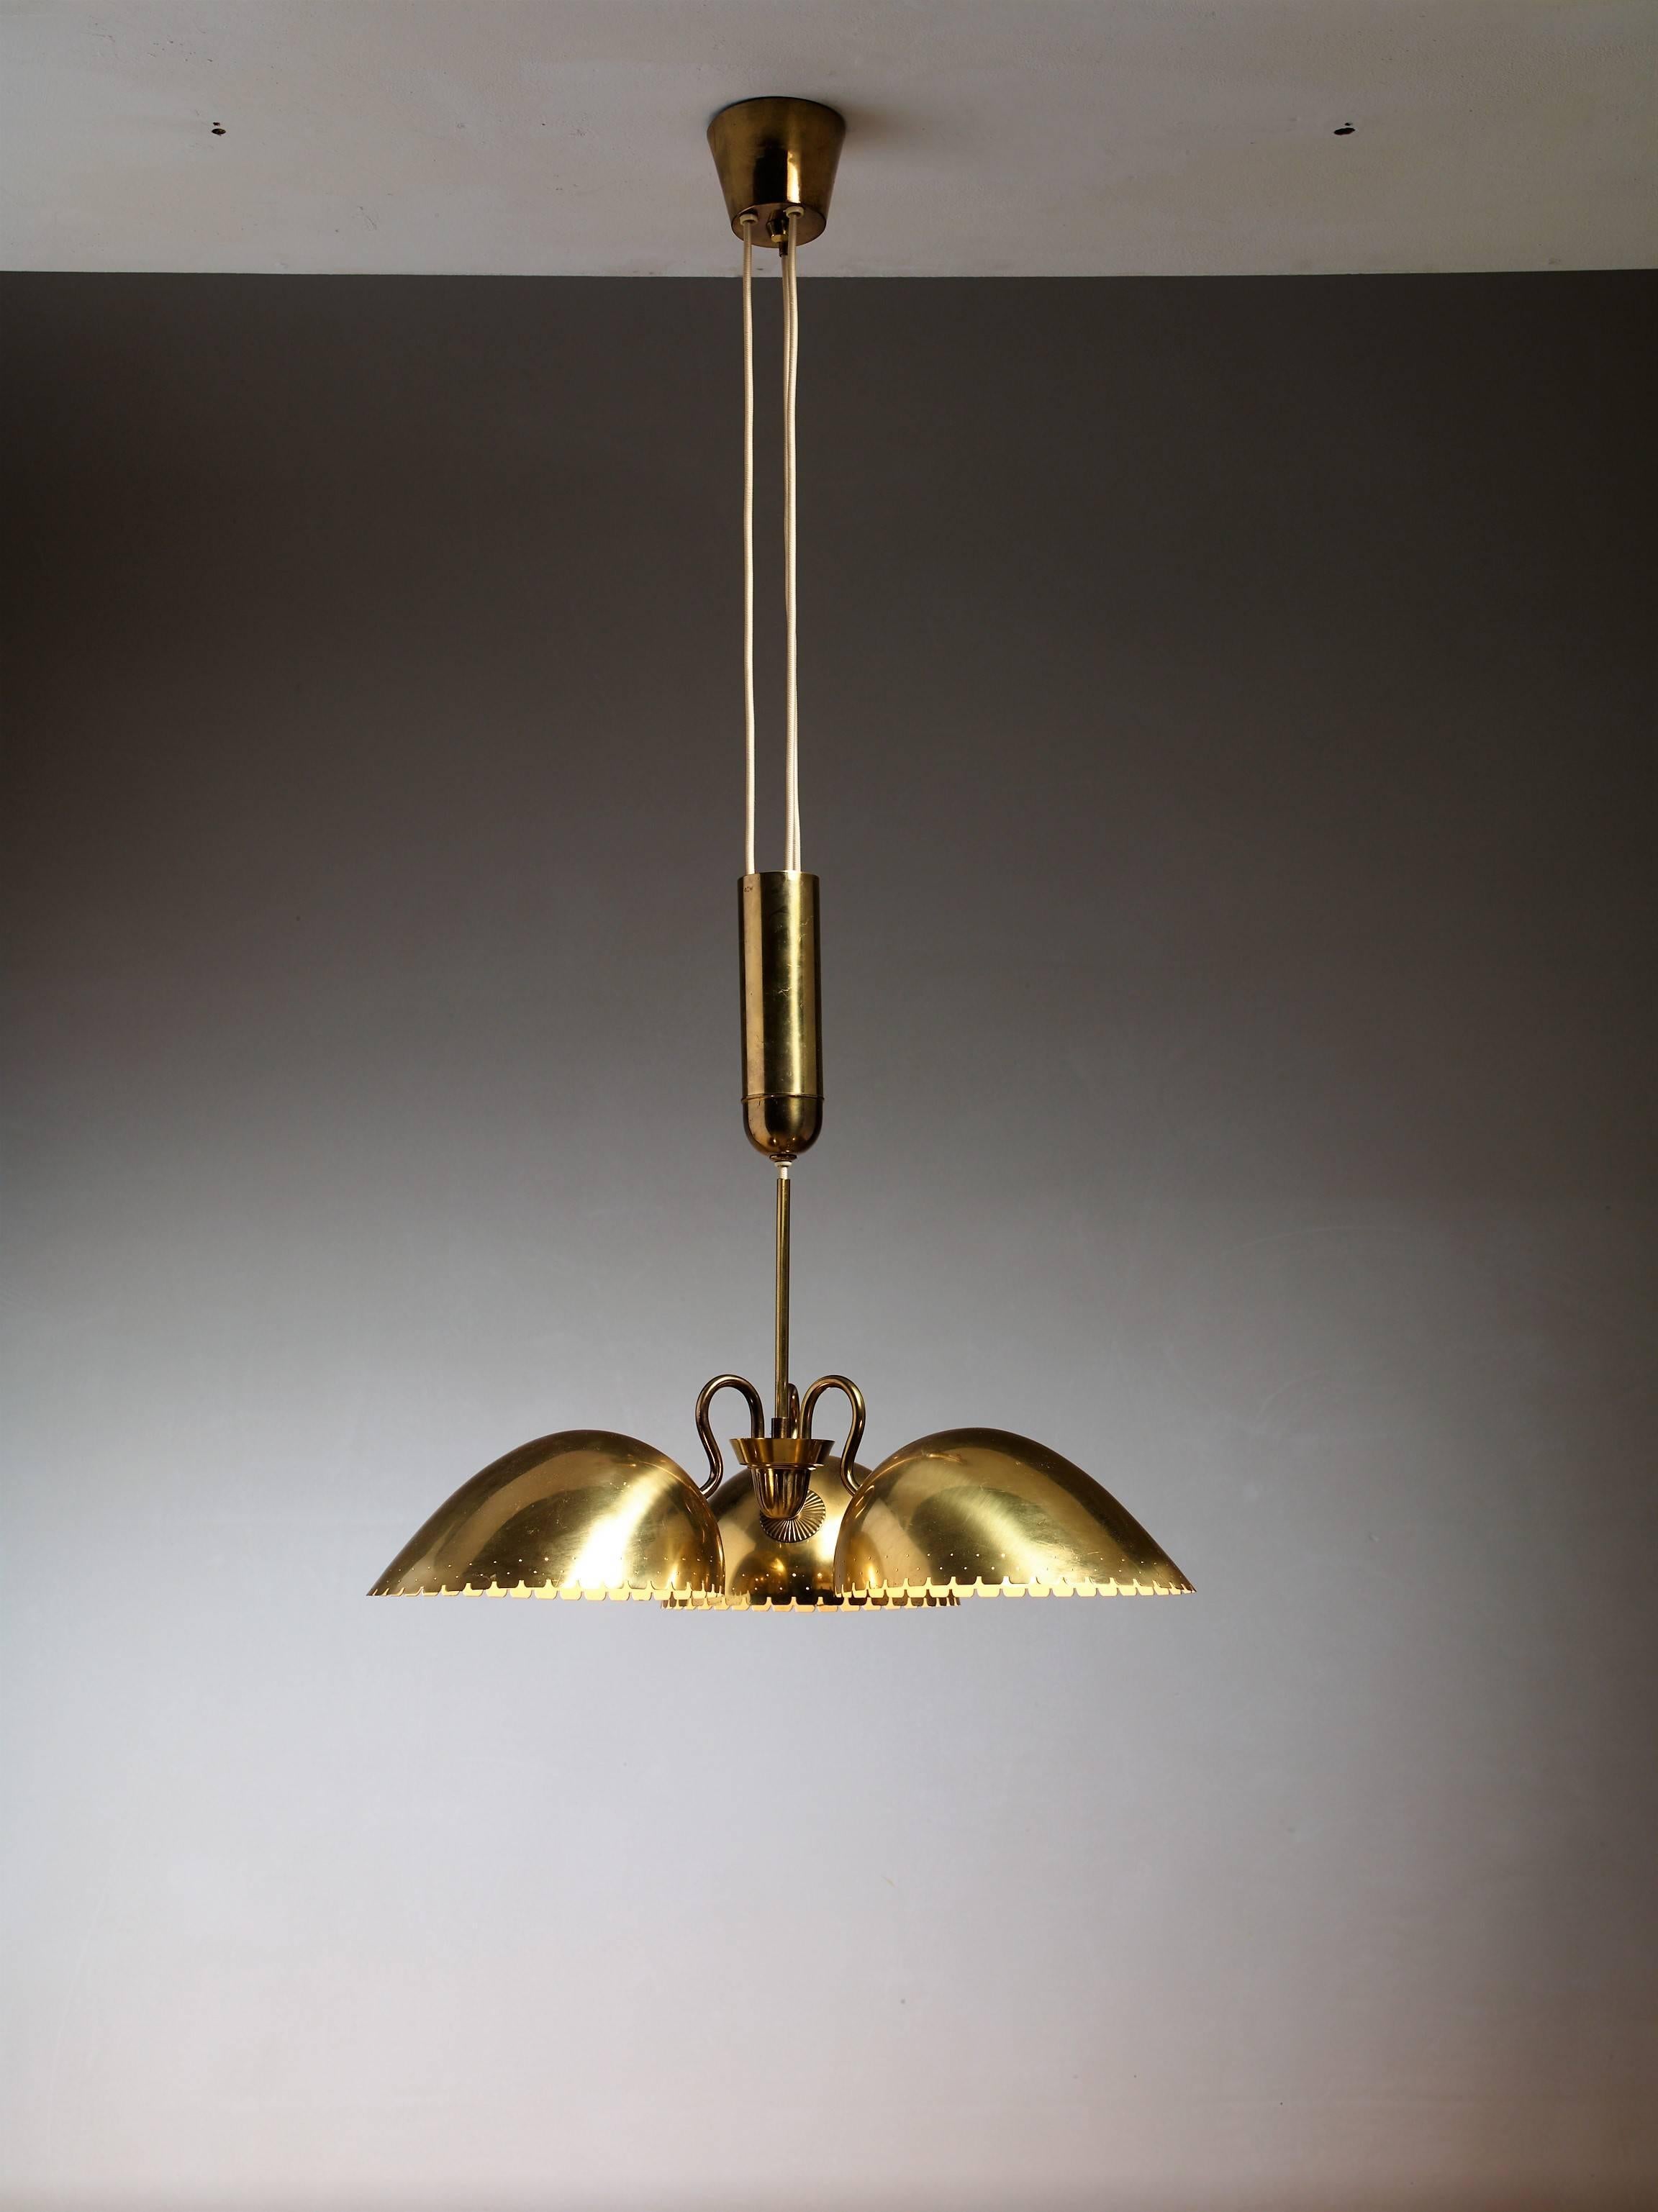 A wonderful brass pendant from Sweden by Bertil Brisborg for Bohlmarks. The lamp has three shades with serrated and perforated edges, facing downwards.
Marked by Bohlmarks with the serial number '11895'.